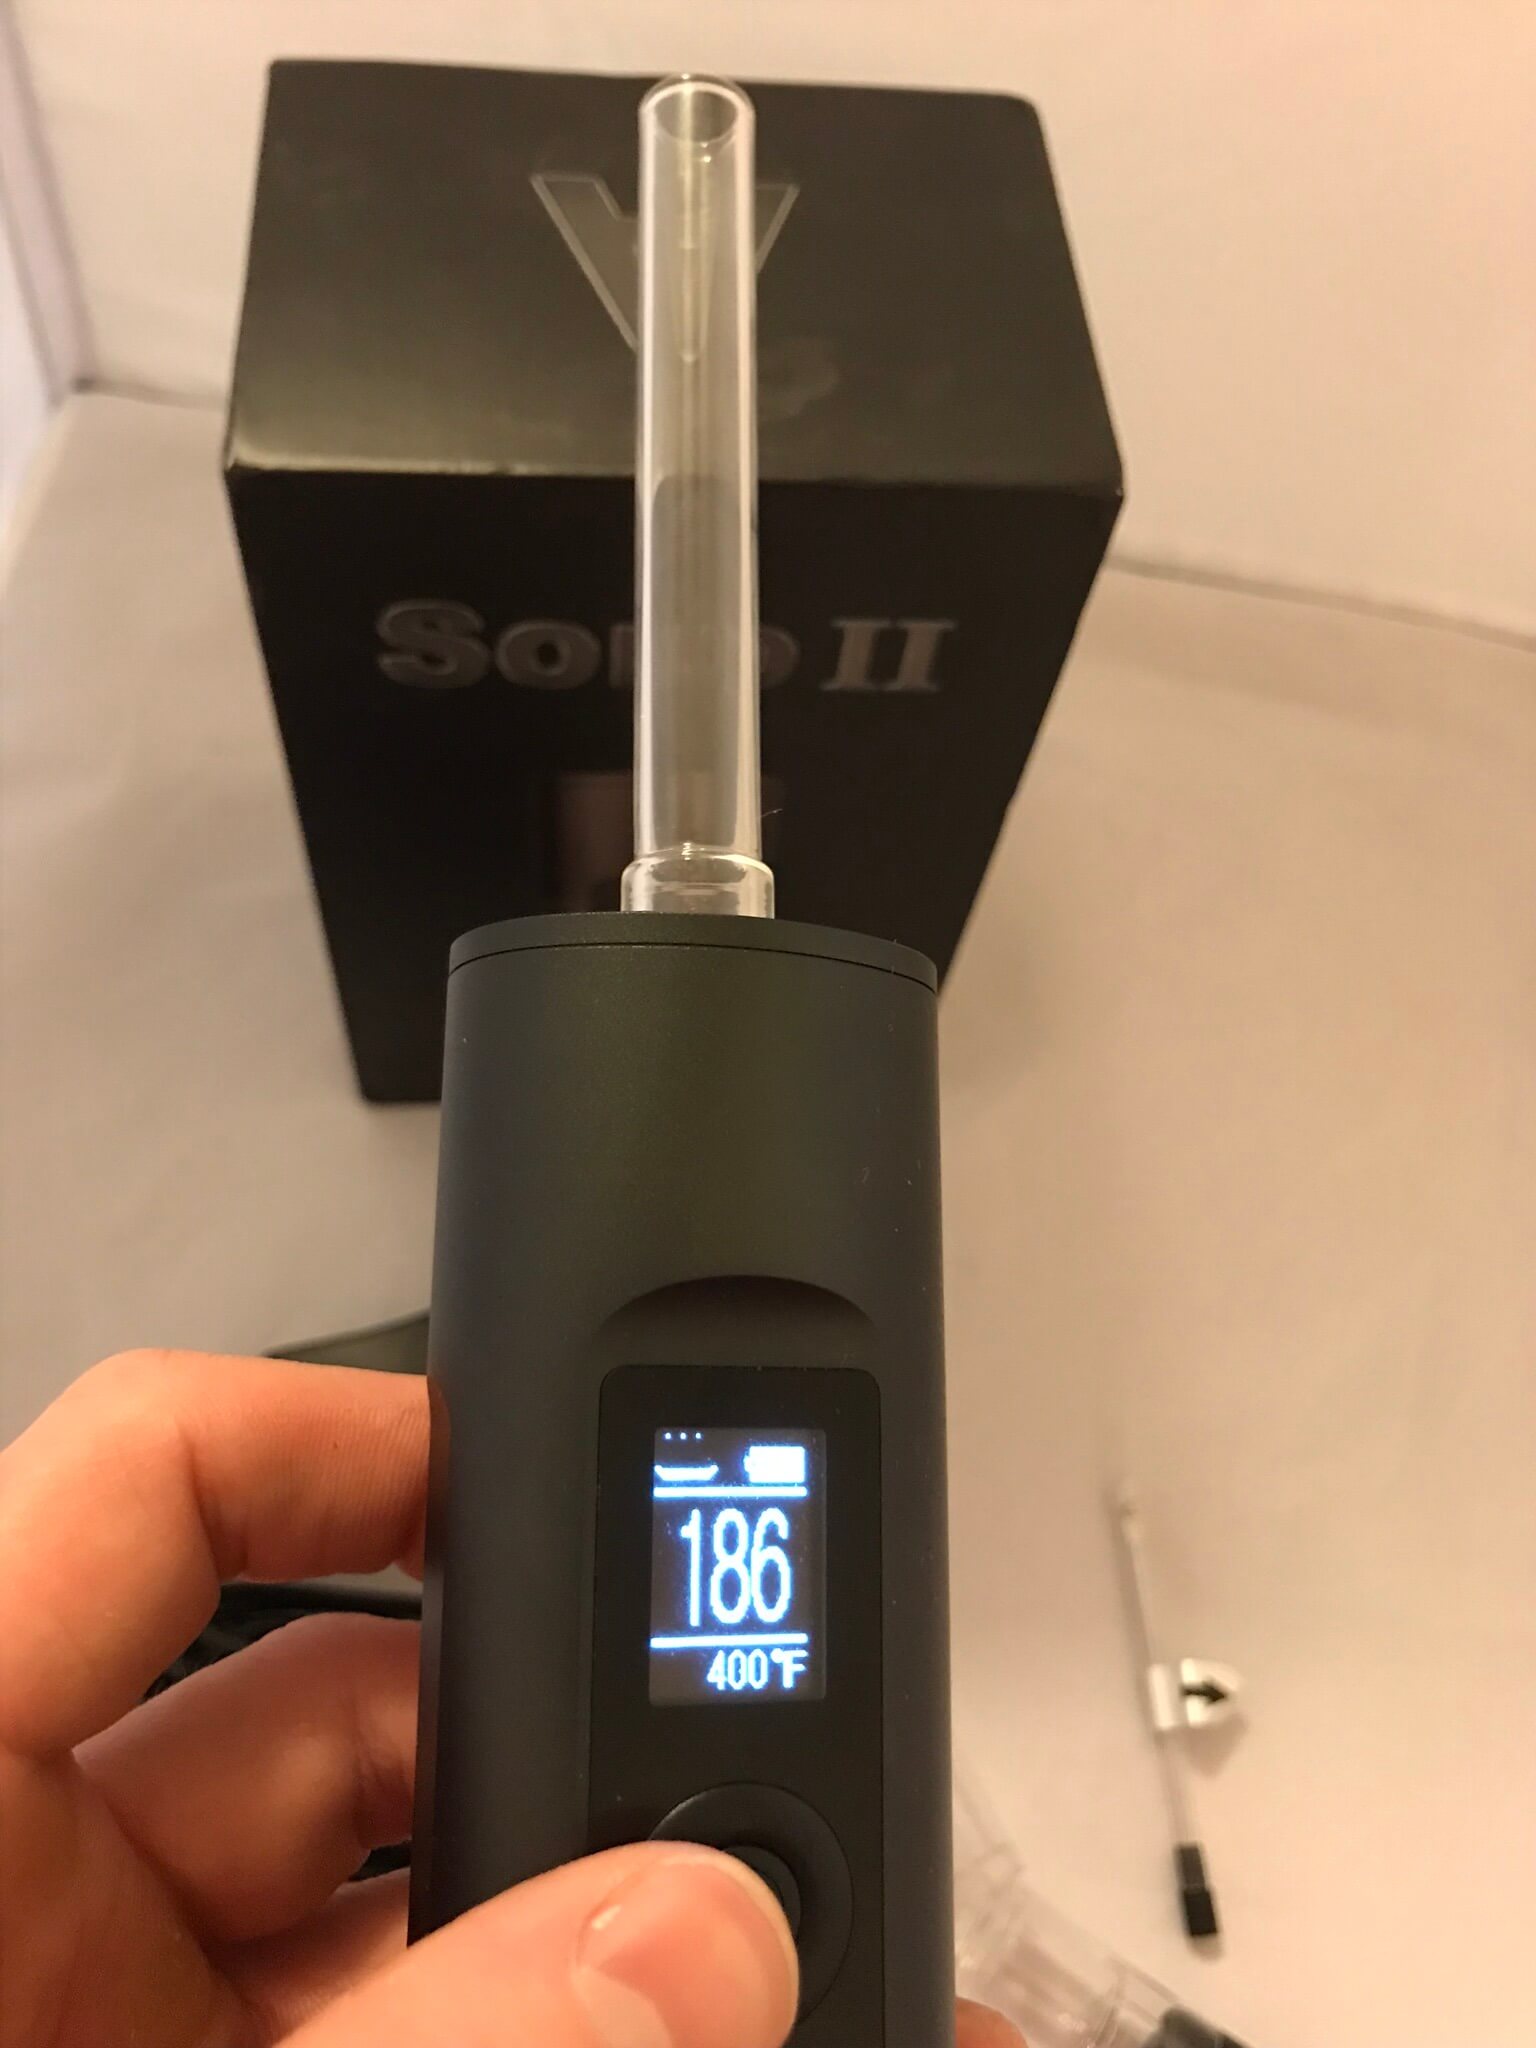 Buy Arizer Solo 2 - Best Price - Tools420 USA